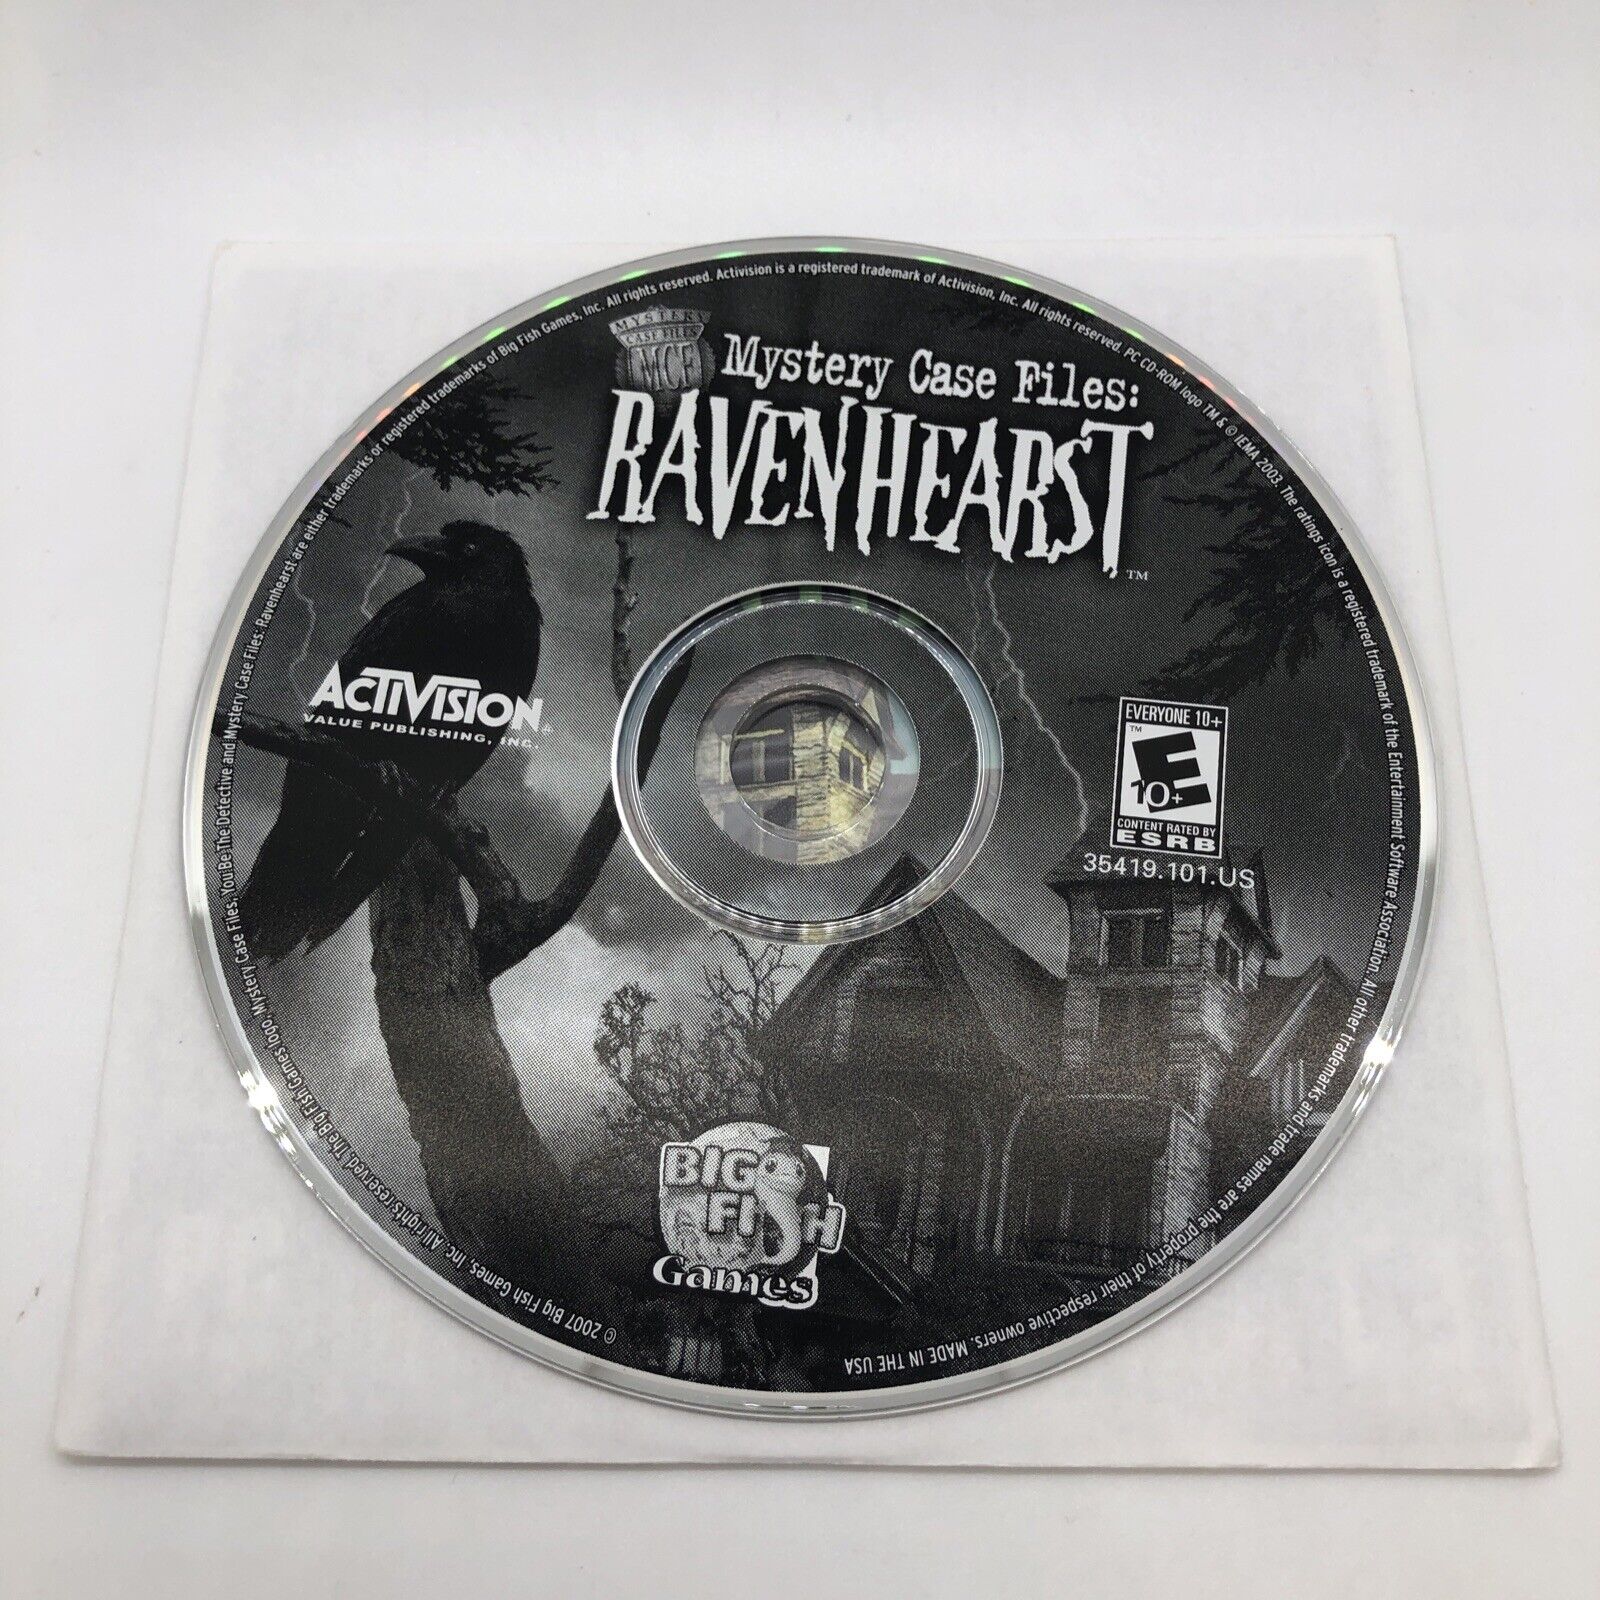 Mystery Case Files Ravenhearst PC CD find seek hidden object picture puzzle game